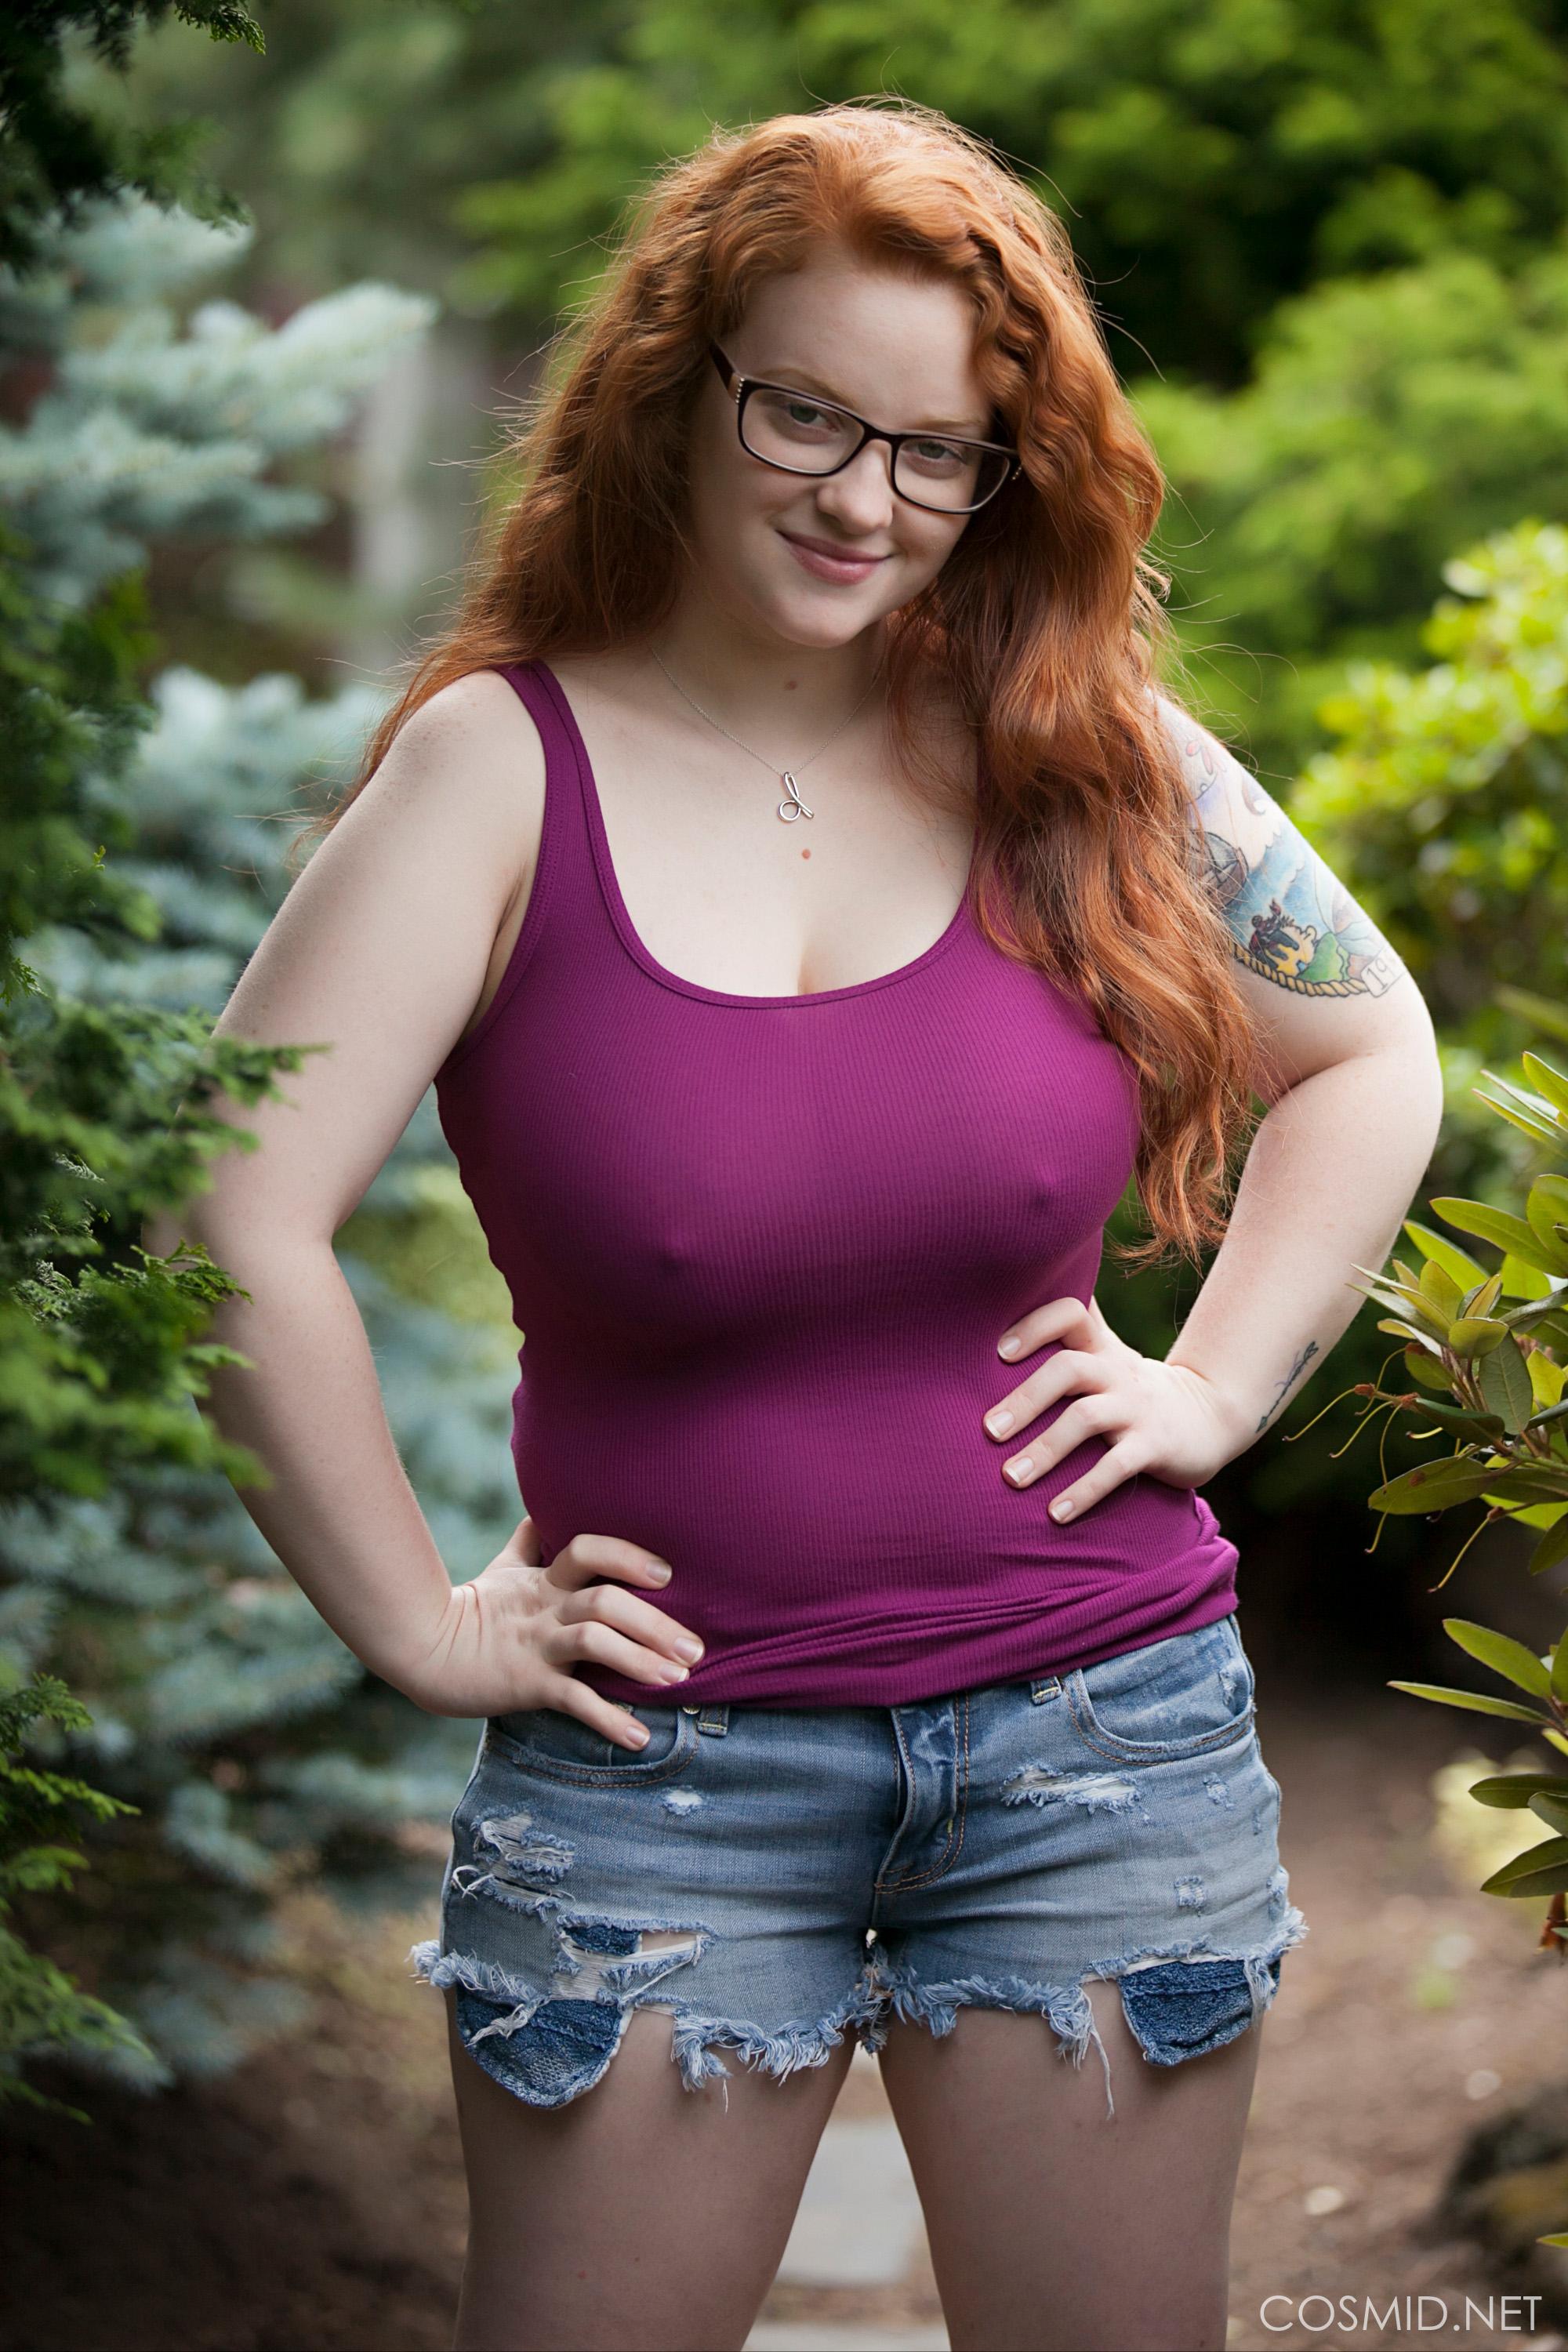 Fat Girls With Glasses Porn - Chubby redhead with big tits Kaycee Barnes looks adorable in her glasses as  she gets nude